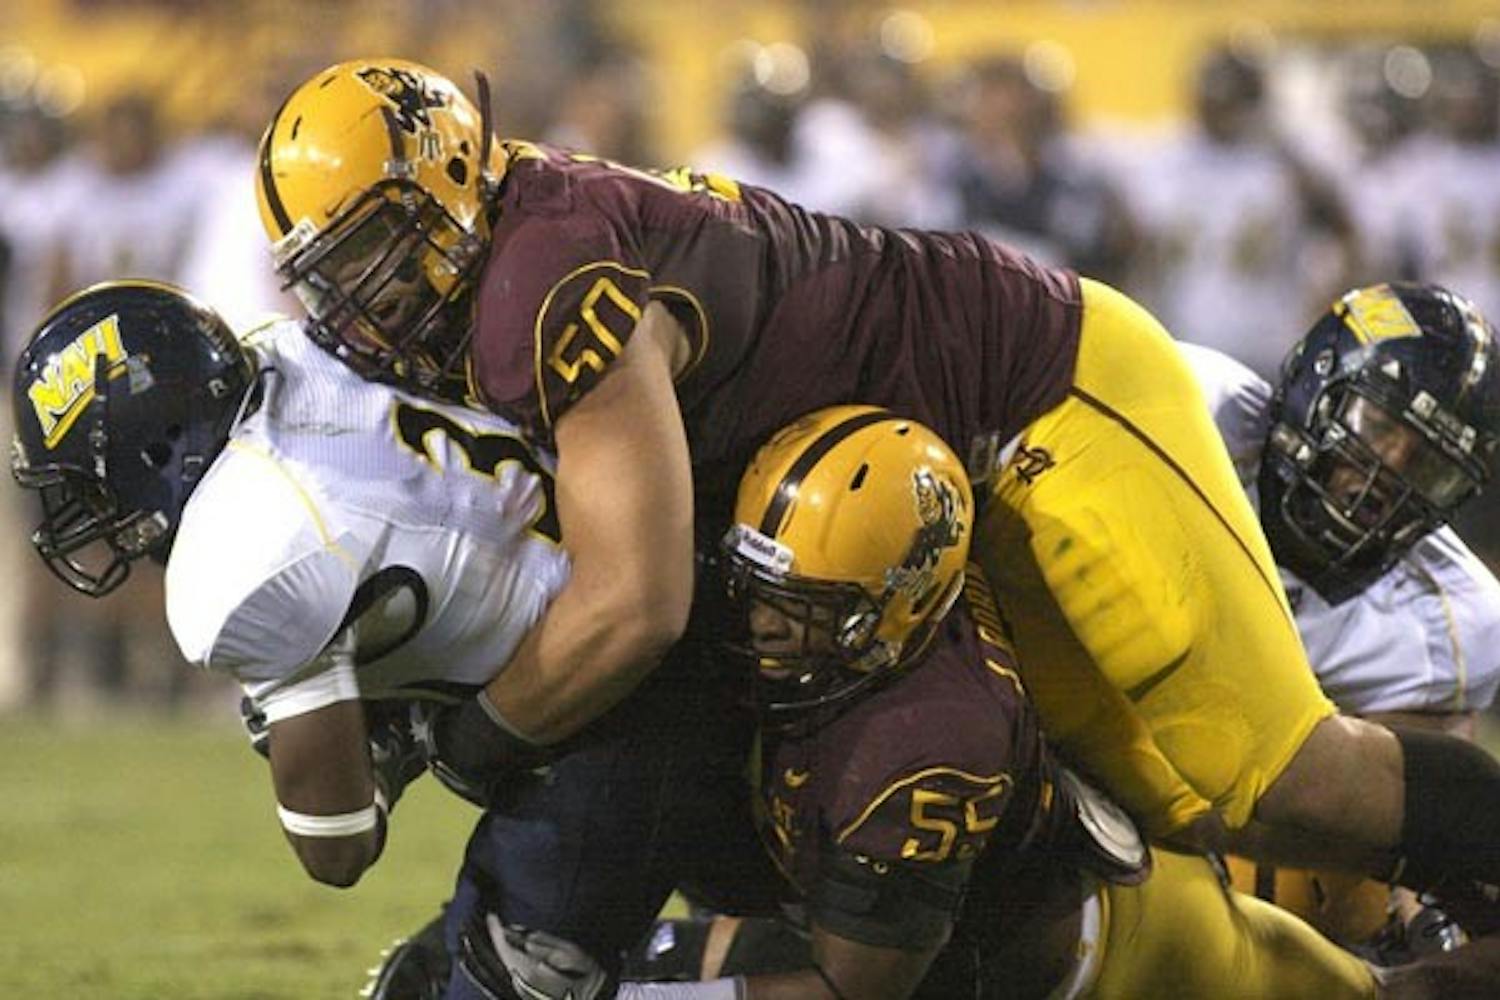 NOWHERE TO RUN: ASU Junior defensive tackle Lawrence Guy (50) and redshirt senior defensive end Jamarr Robinson (55) take down Northern Arizona freshman running back Zach Bauman during last Saturday's 41-20 win. The Sun Devils' defense faces a much bigger challenge on the ground this week in Wisconsin junior running back John Clay, a Heisman Trophy hopeful and the reigning Big Ten Conference offensive player of the year. (Photo by Scott Stuk)